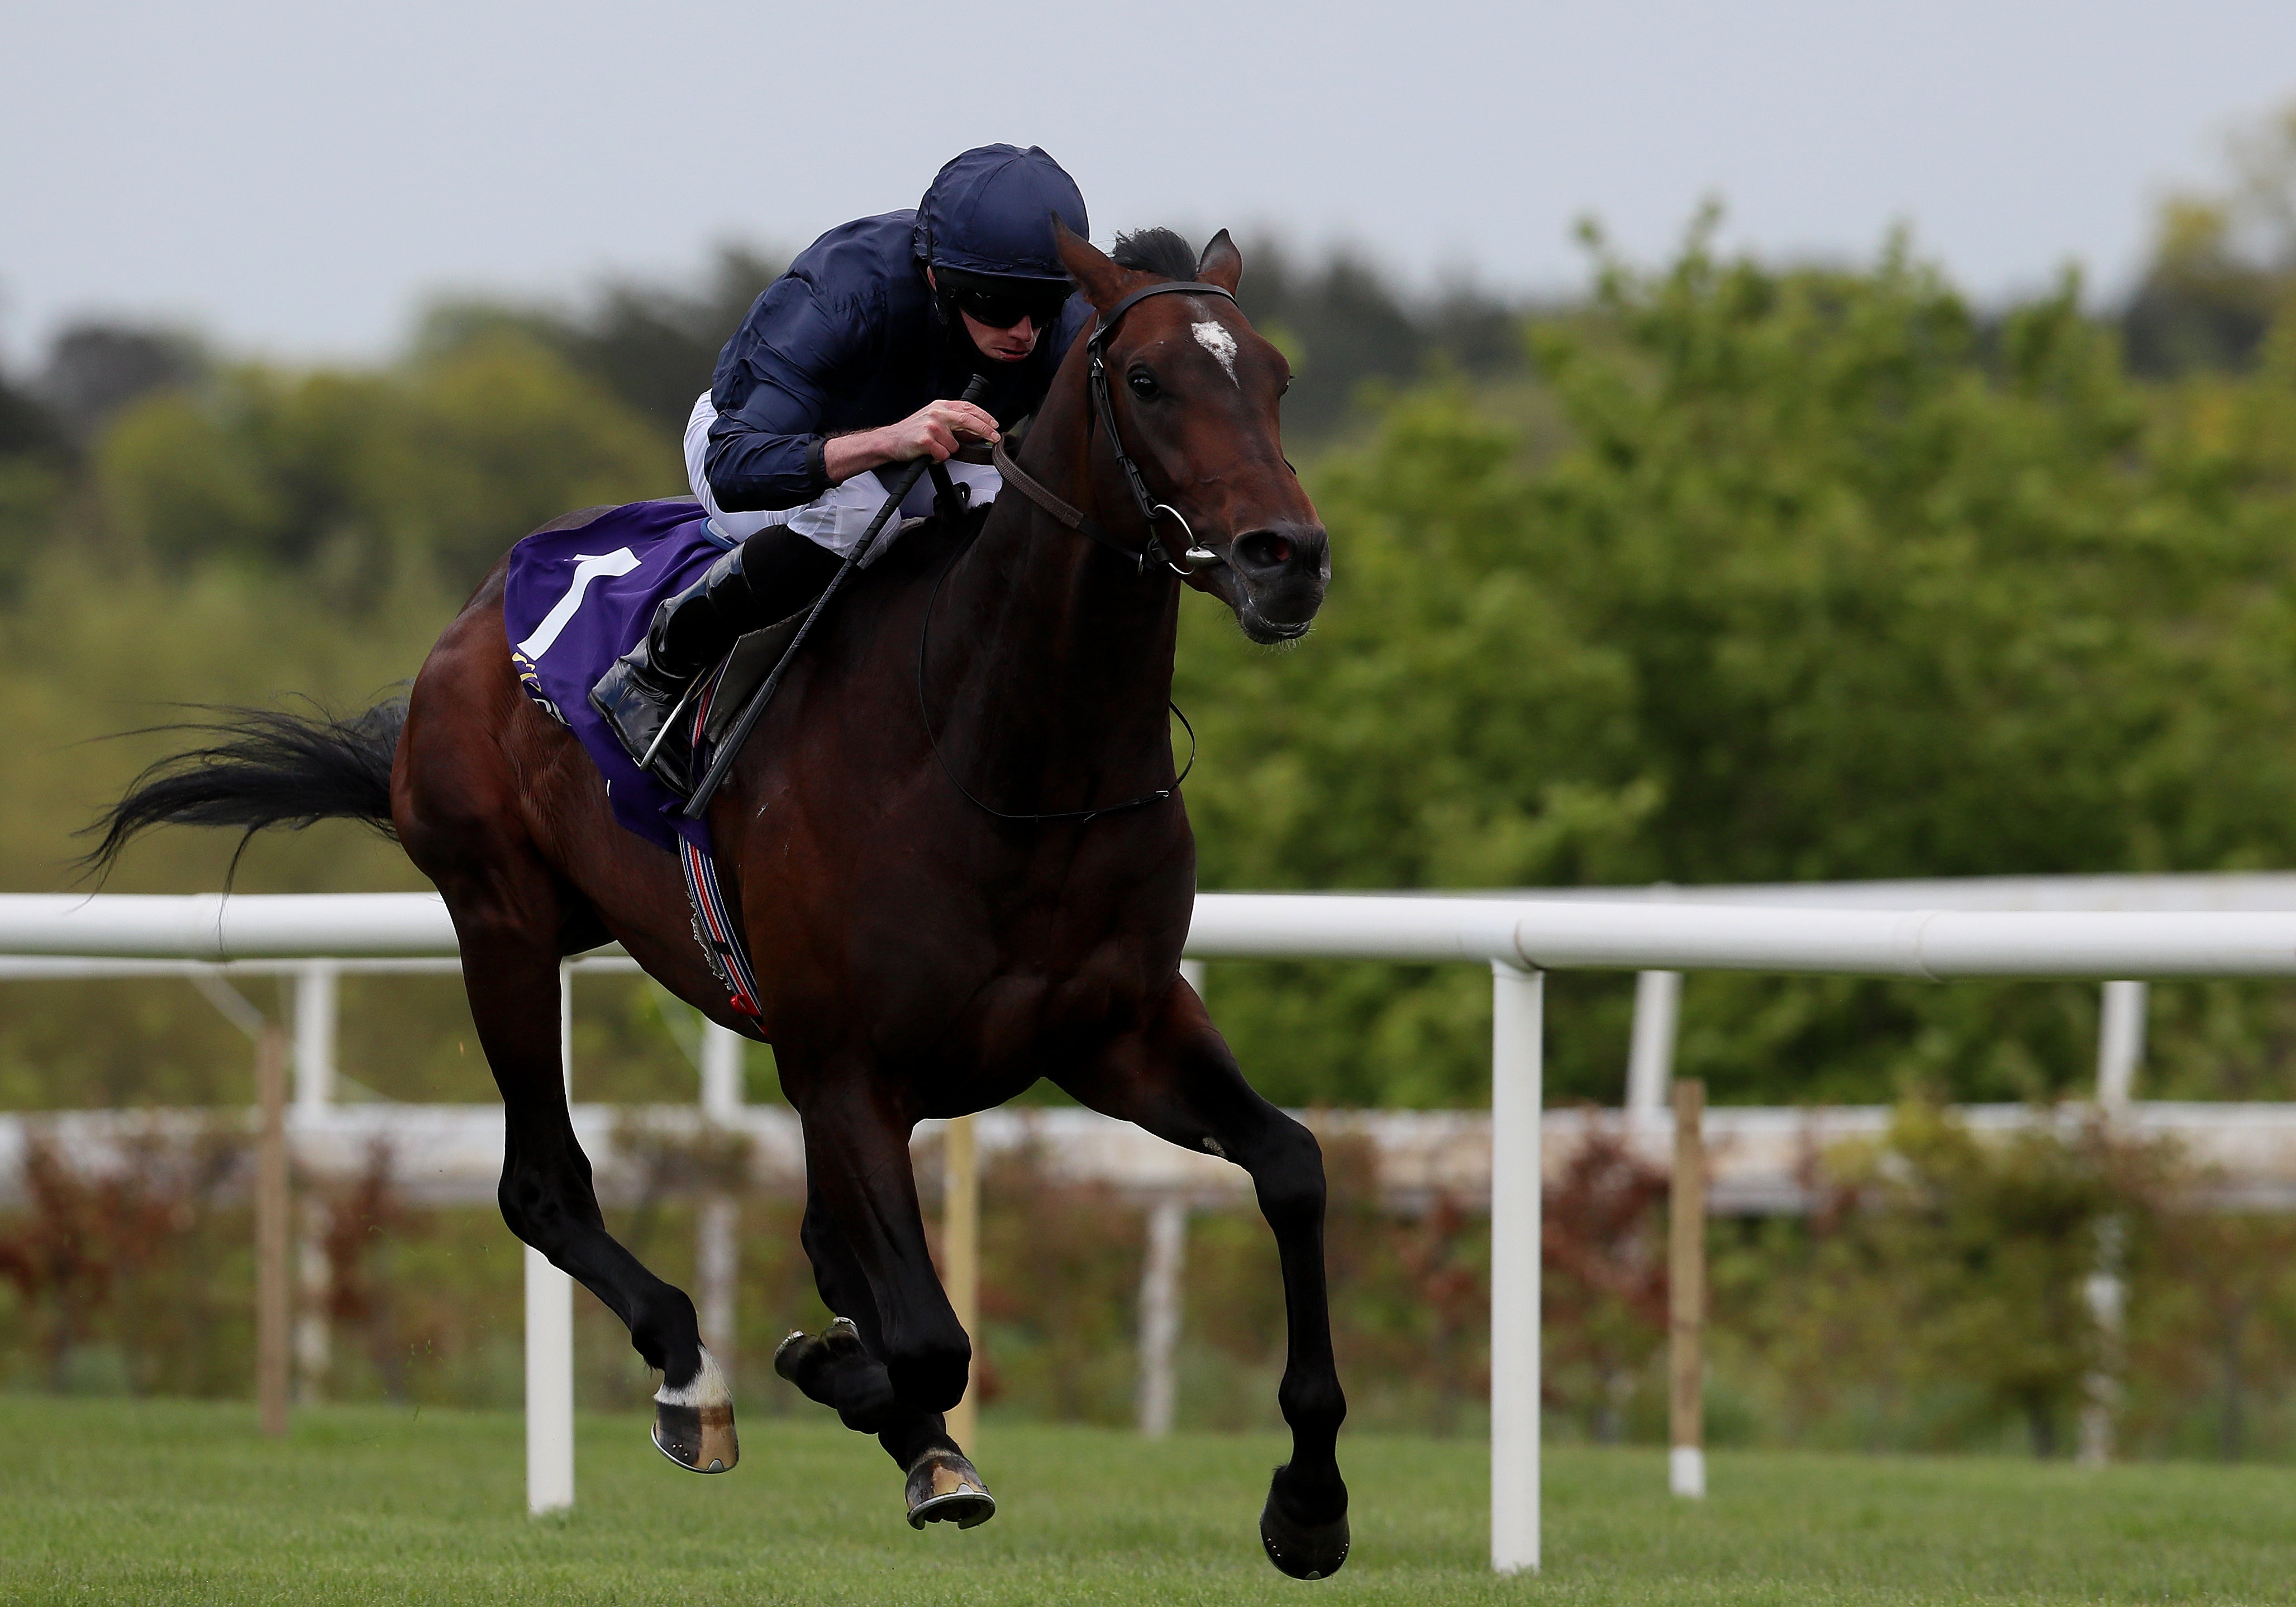 Bolshoi Ballet is the ante-post favourite for the Derby